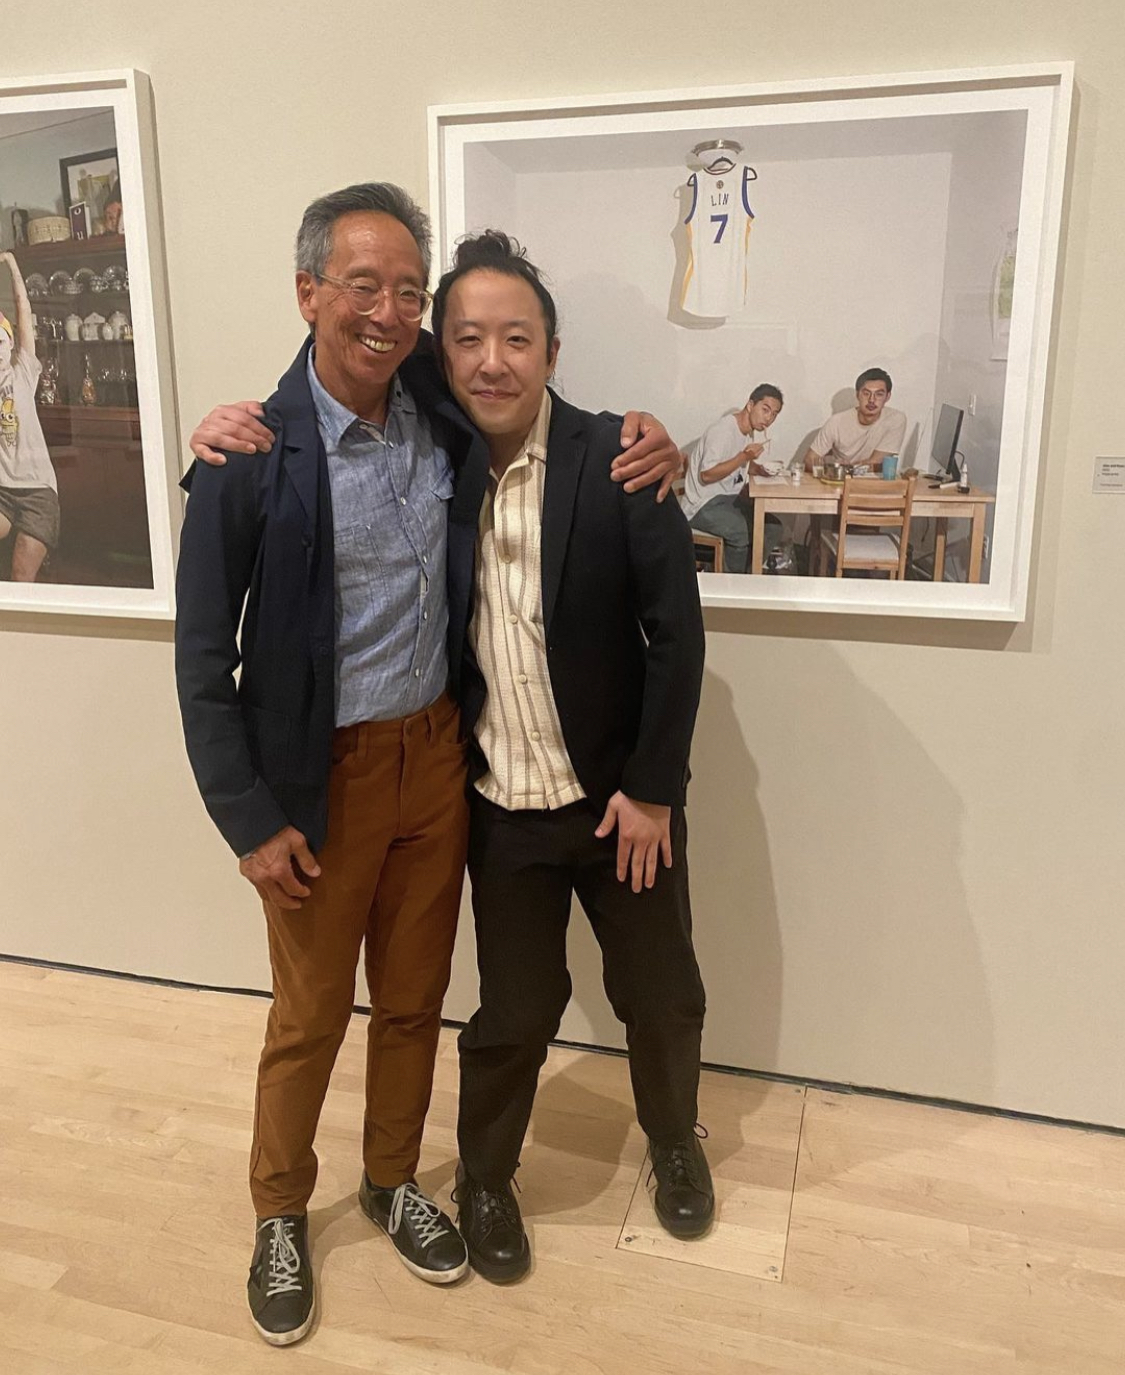 Reagan Louie and Jarod Lew at the exhibition opening of Kinship: Photography and Connection